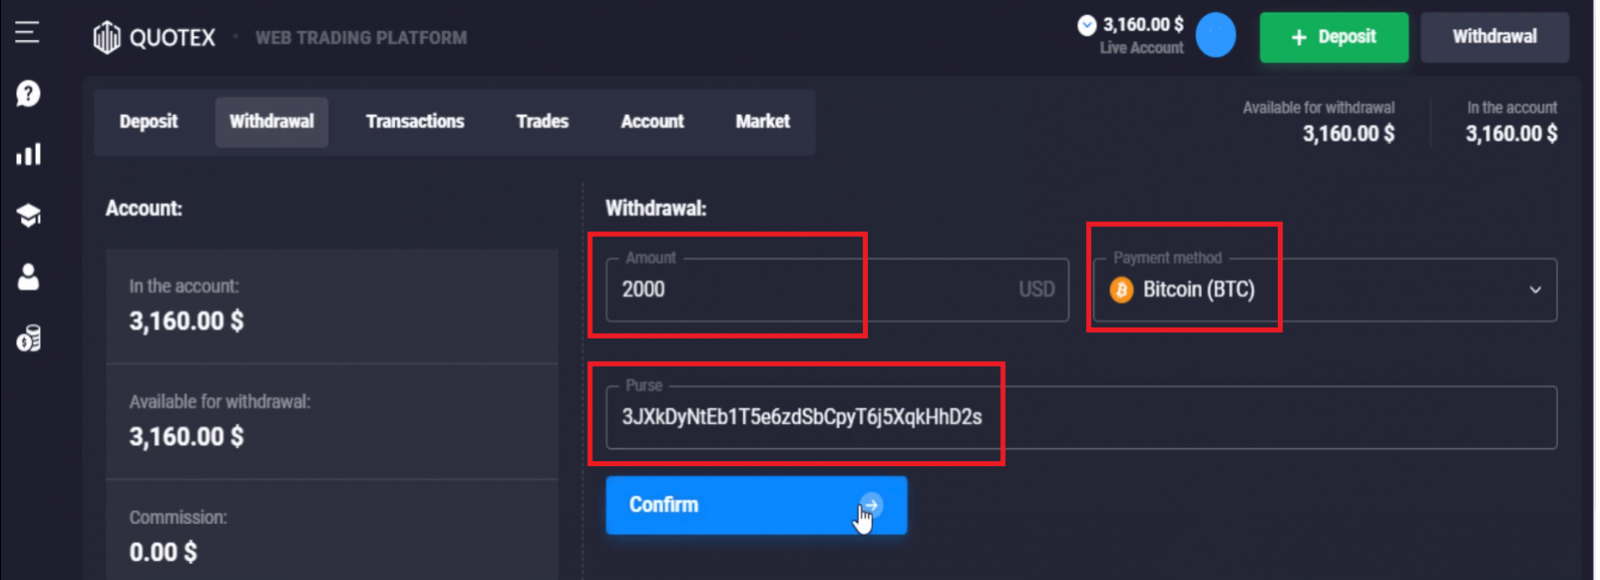 How to Open Account and Withdraw Money from Quotex